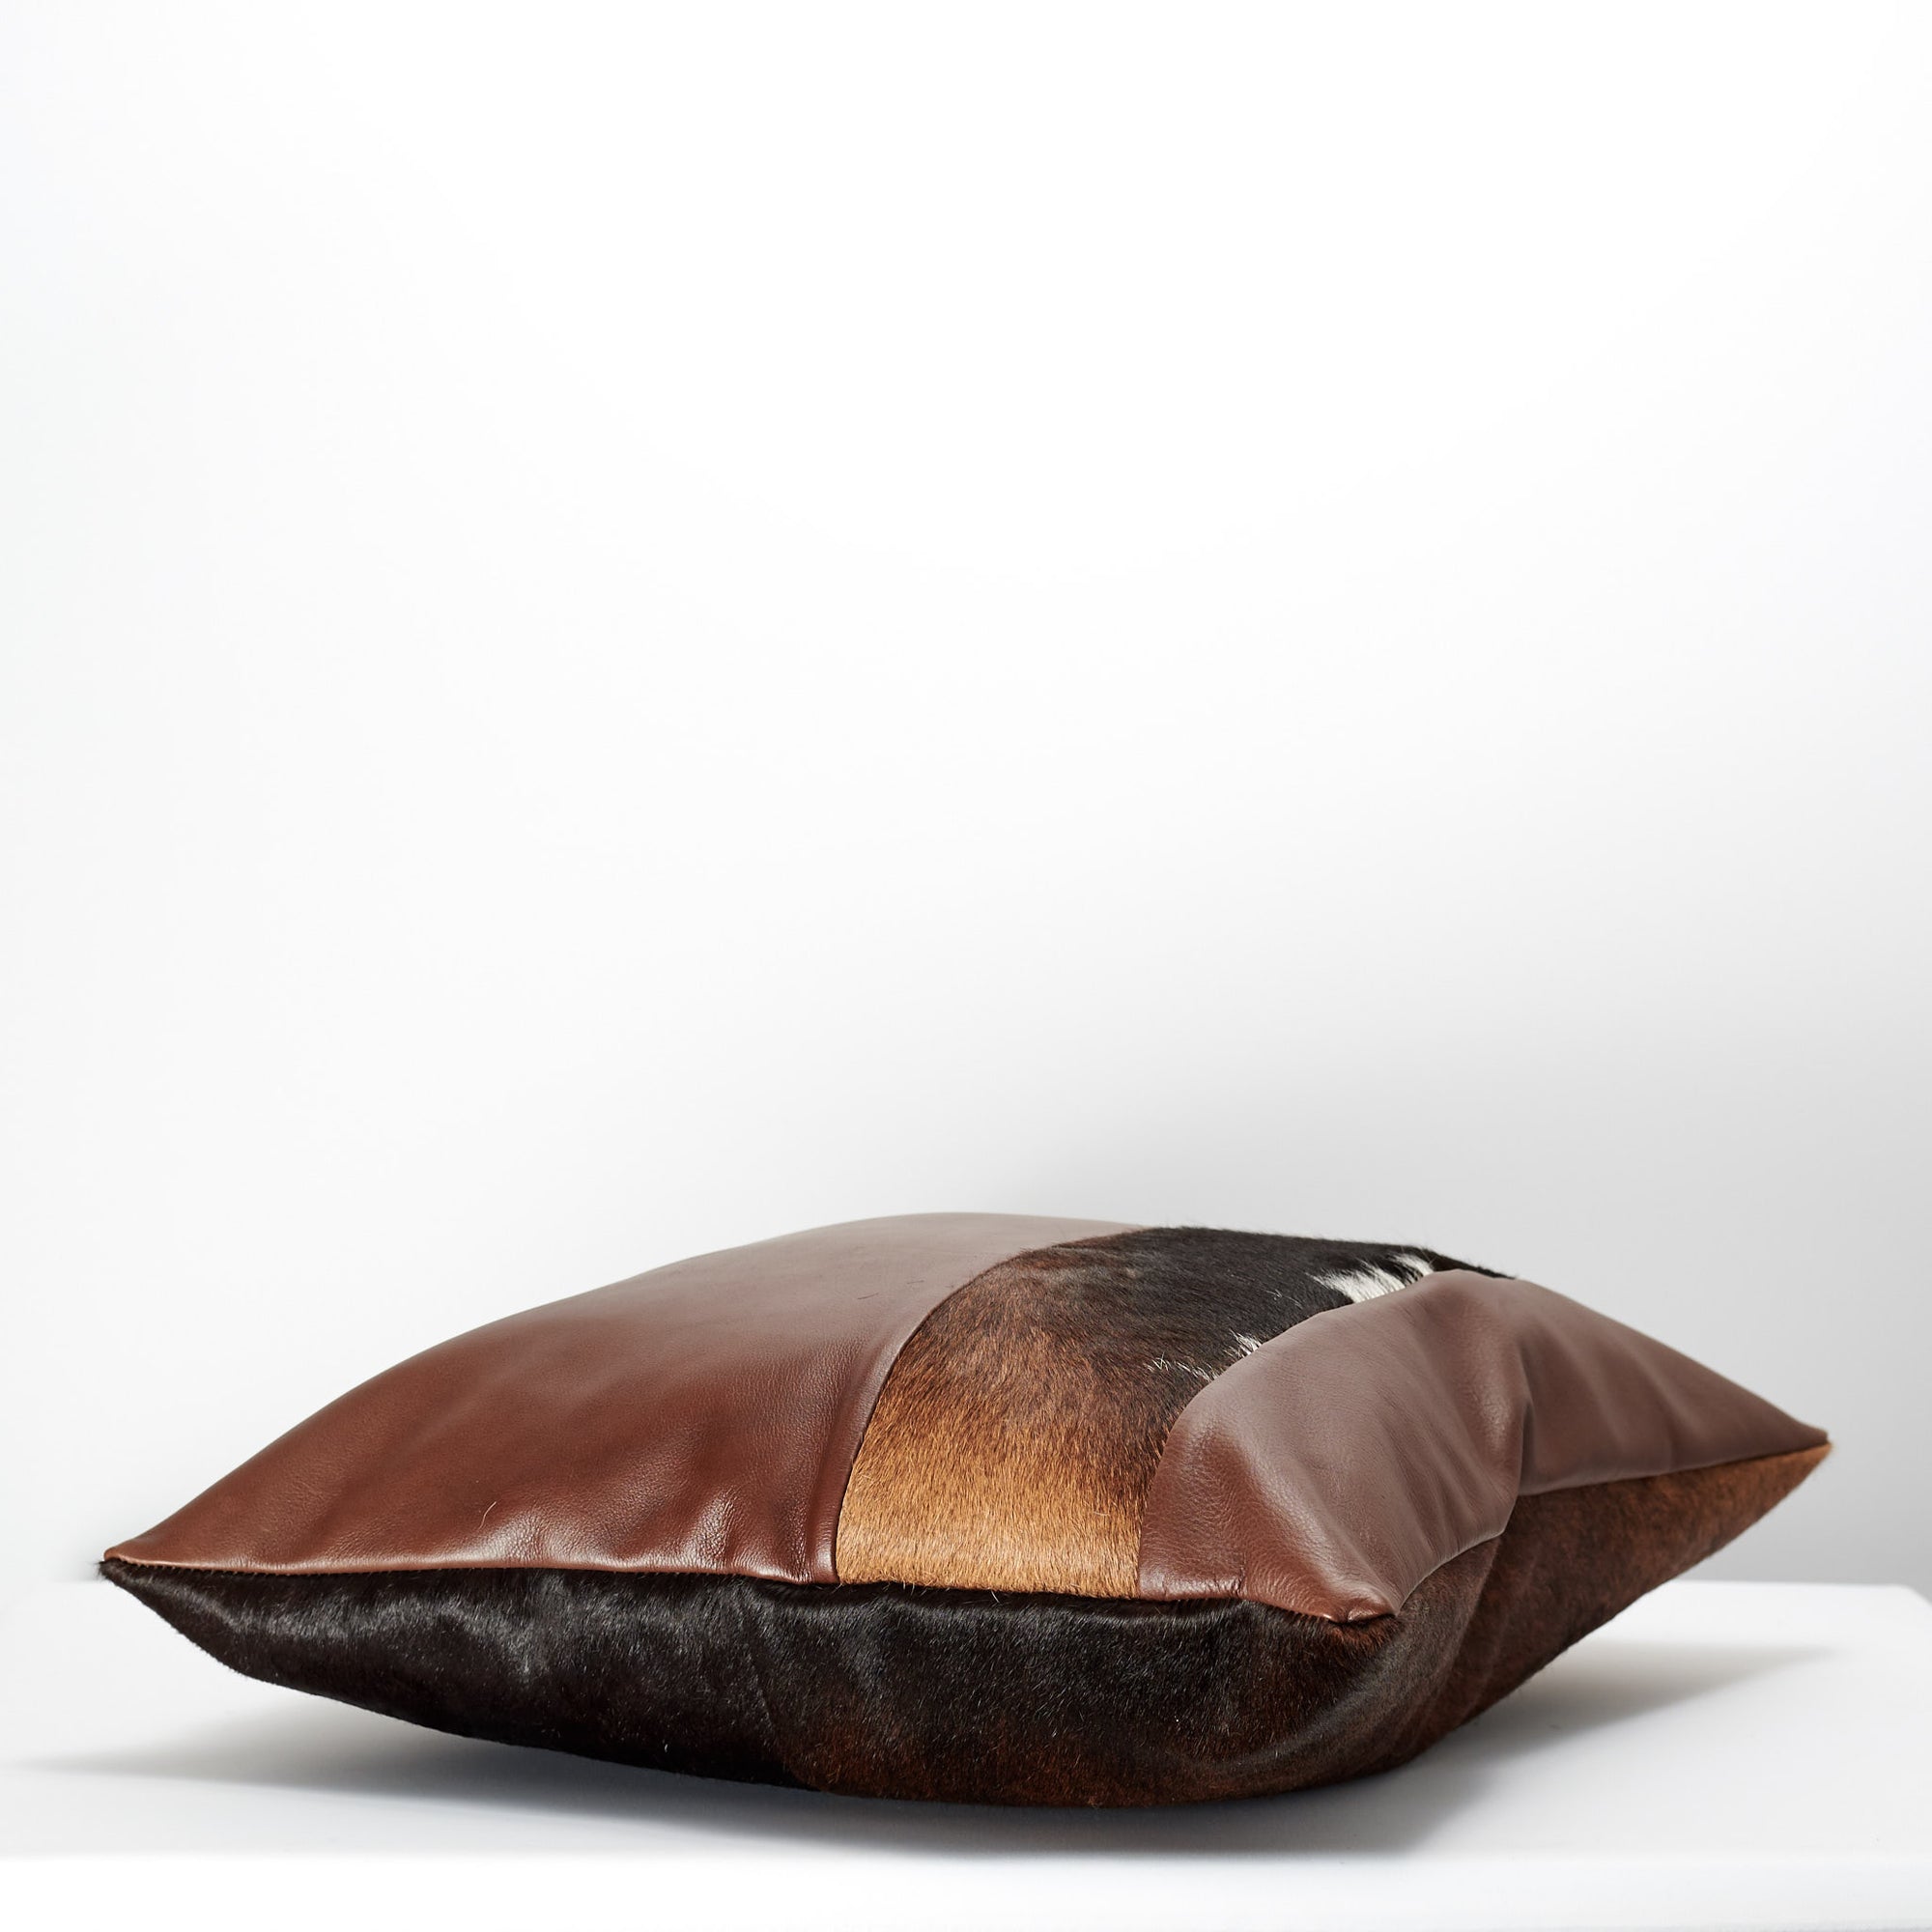 Brown Dual Leather Cowhide Cushion. Couch decoration, lounge, bench, sofa cushion covers, custom size, pillow. 